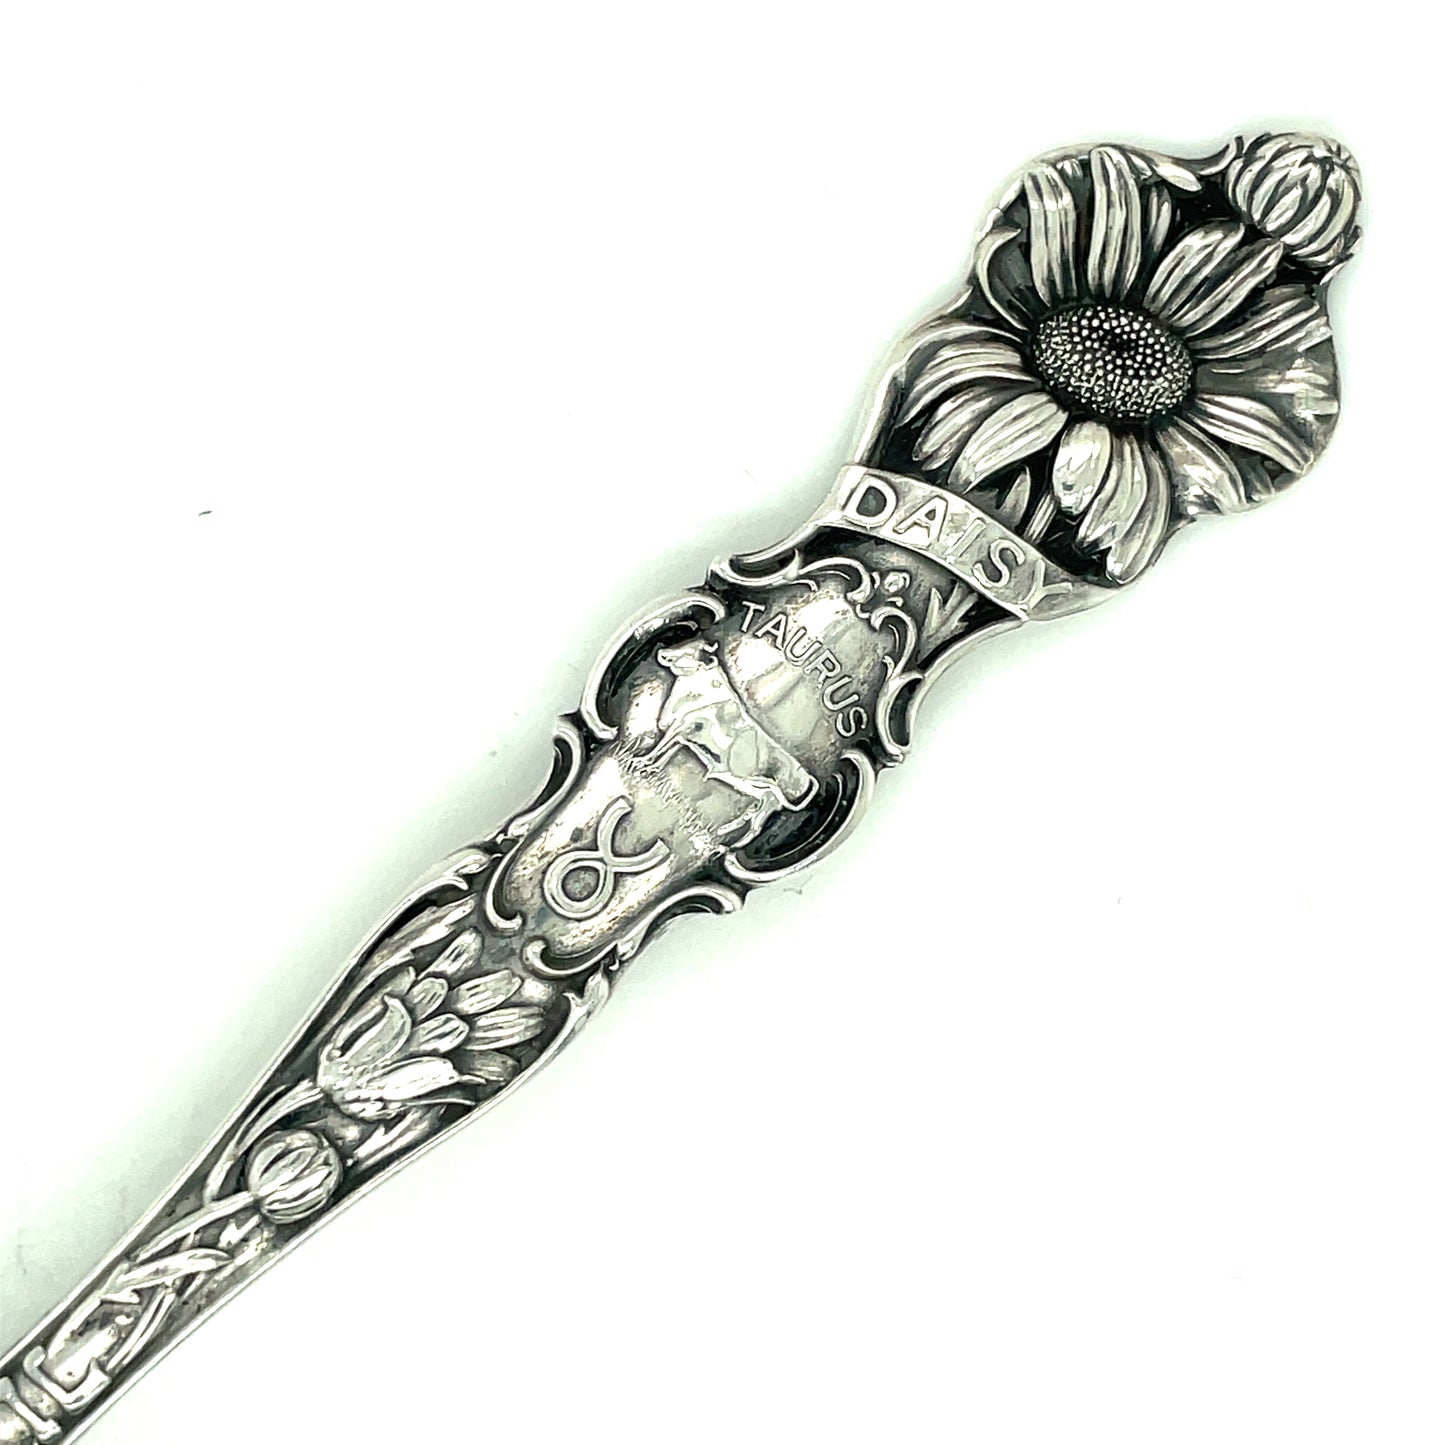 Vintage R. Wallace & Sons April Sterling Silver Spoon Daisy Taurus Monogram